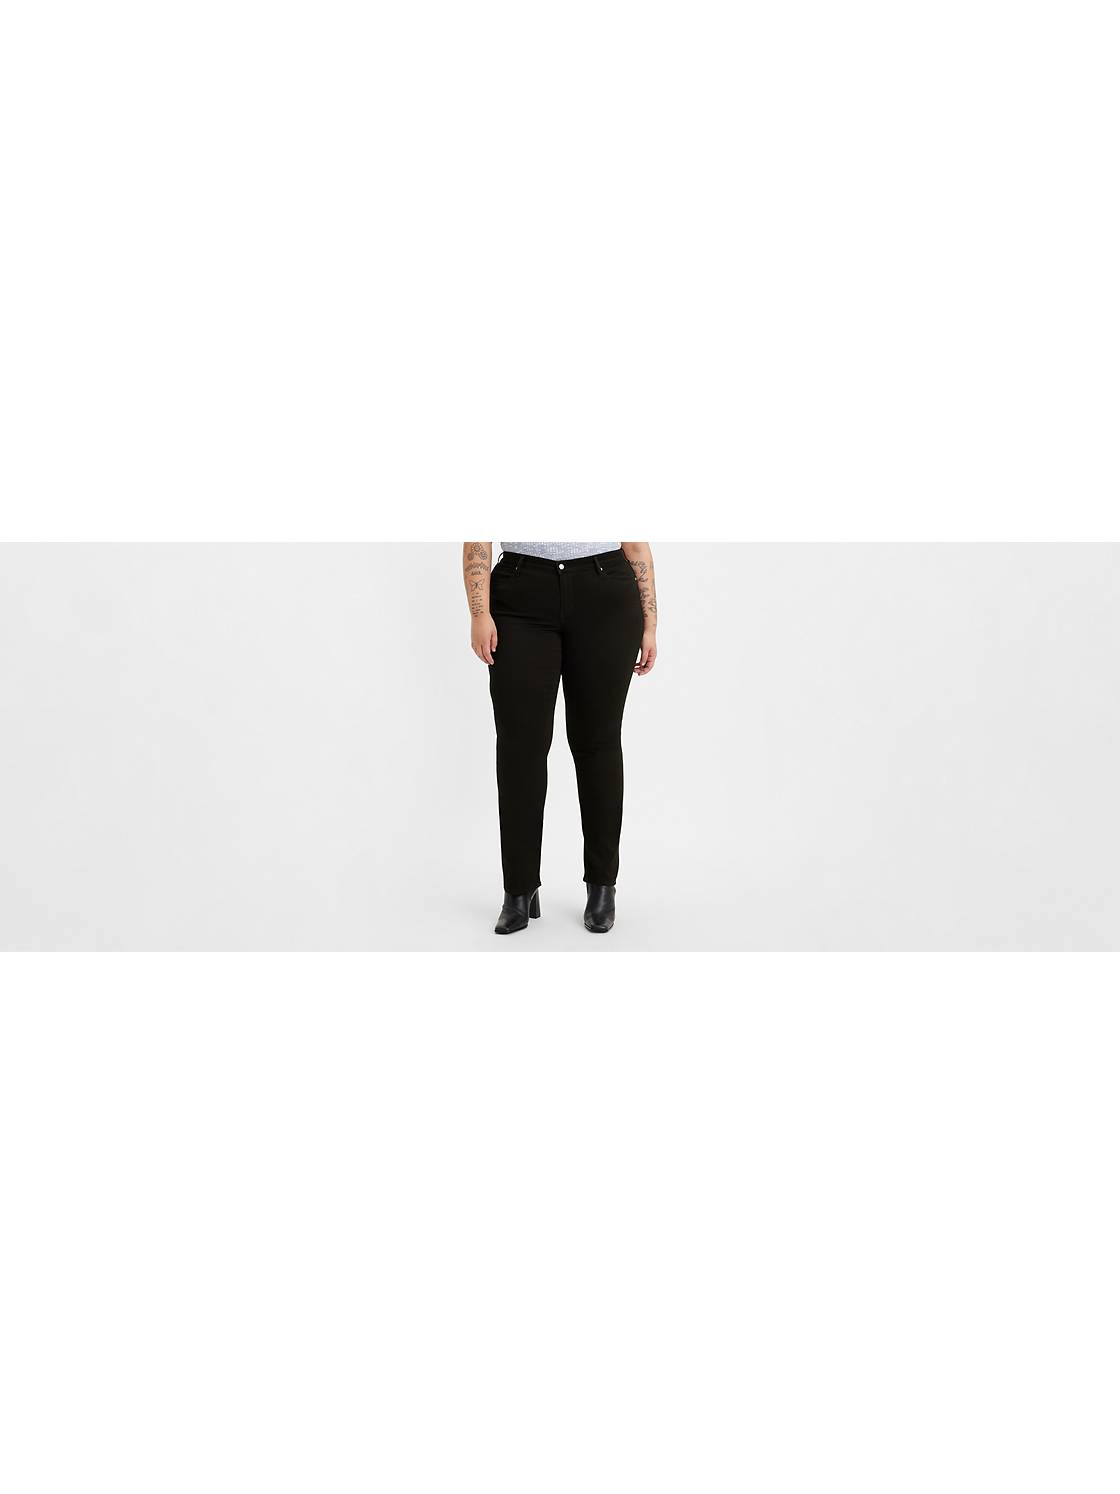 Size 16 Jeans for Women